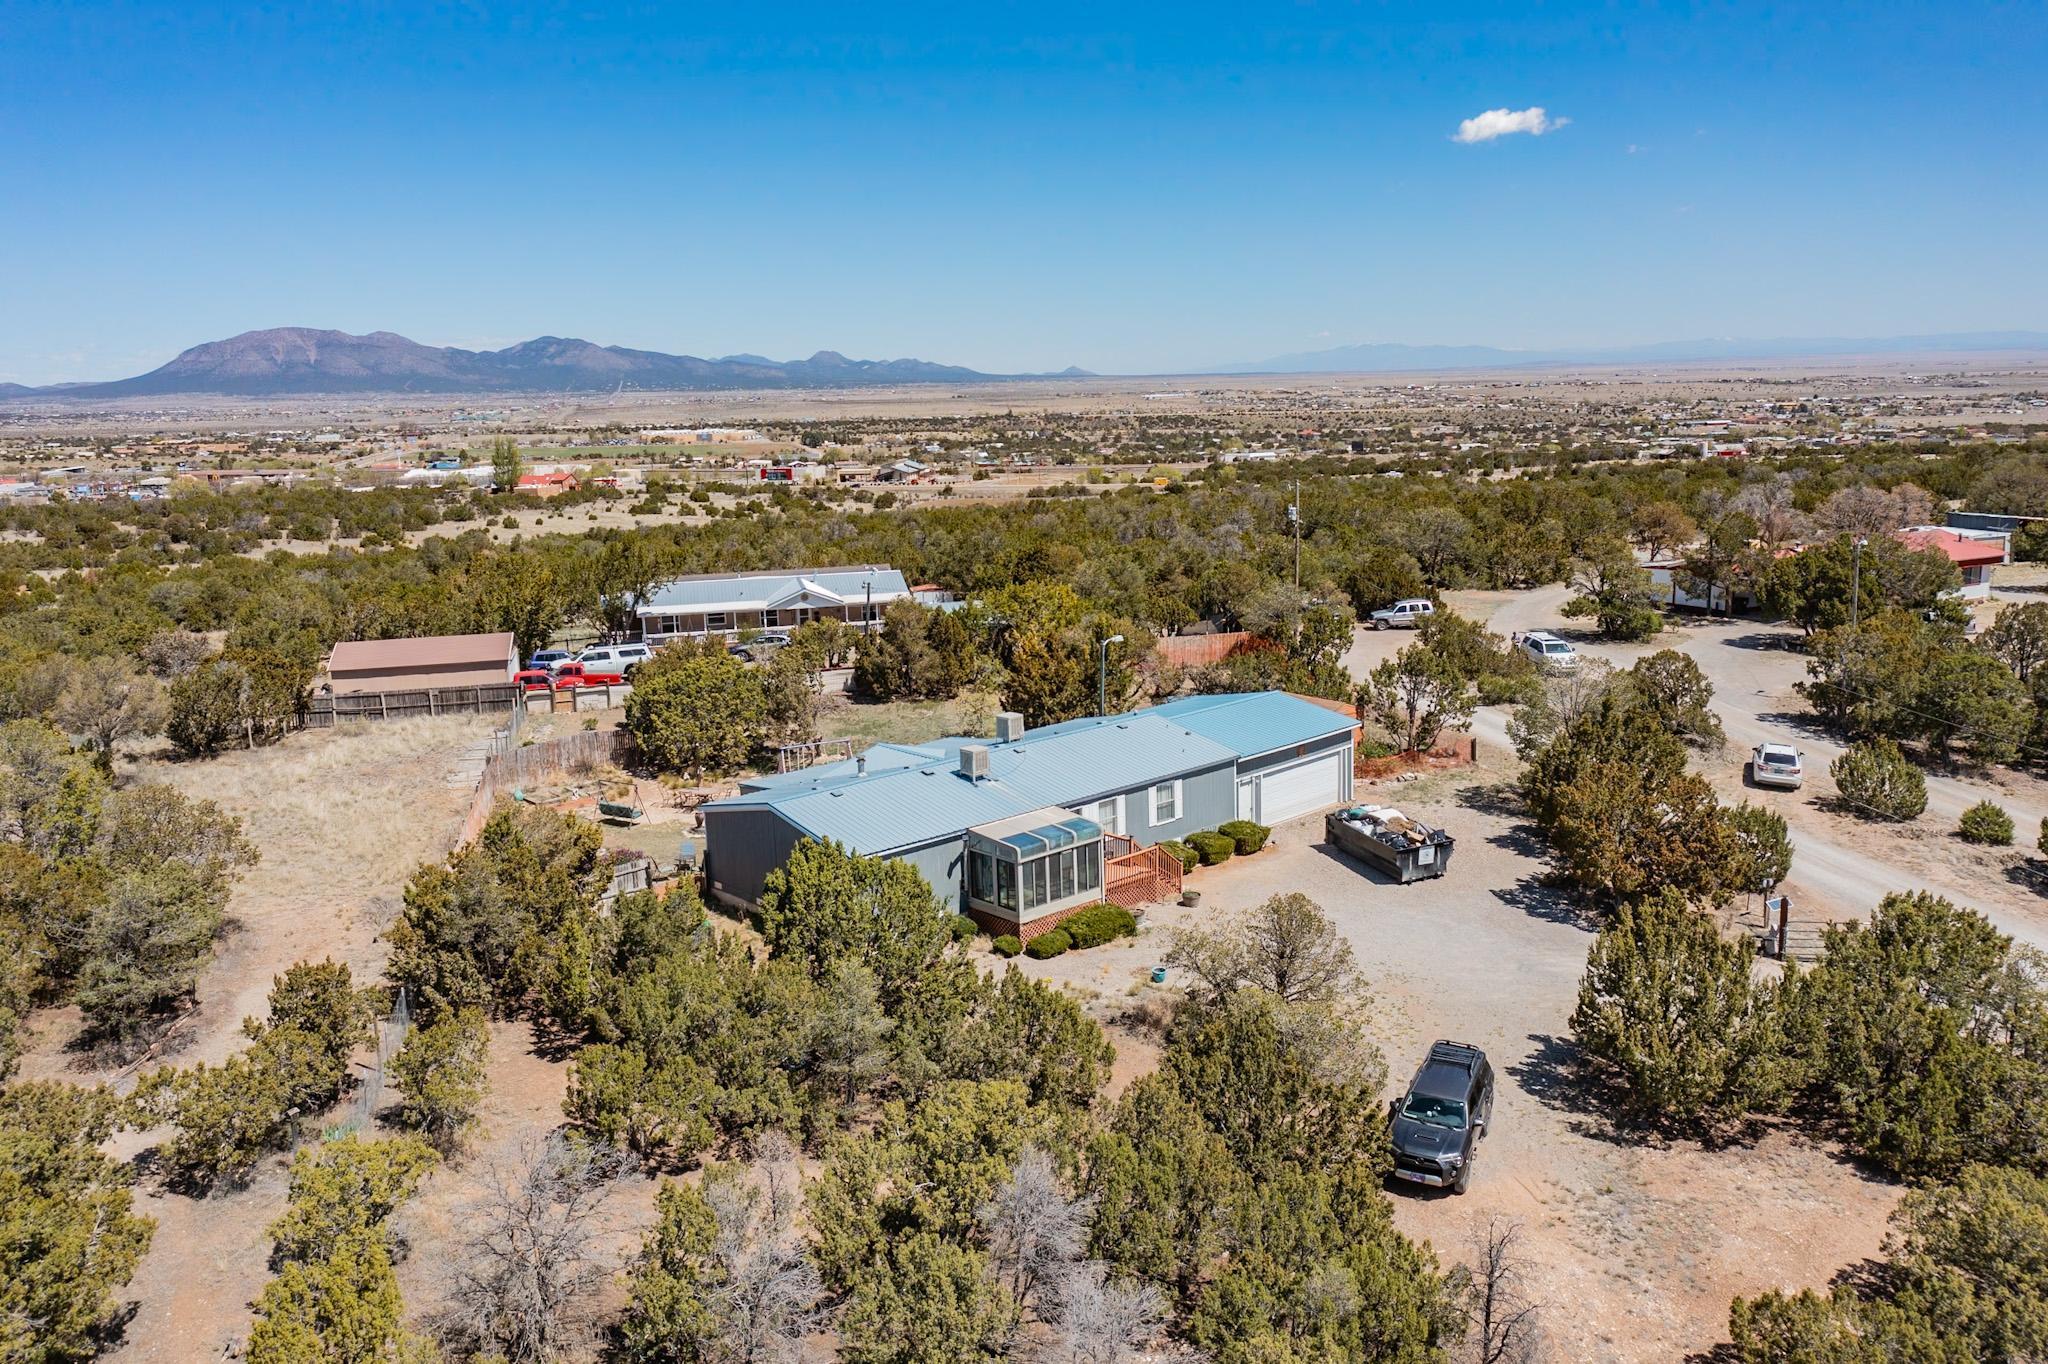 17 A E Willard Road, Edgewood, New Mexico 87015, 3 Bedrooms Bedrooms, ,2 BathroomsBathrooms,Residential,For Sale,17 A E Willard Road,1061275